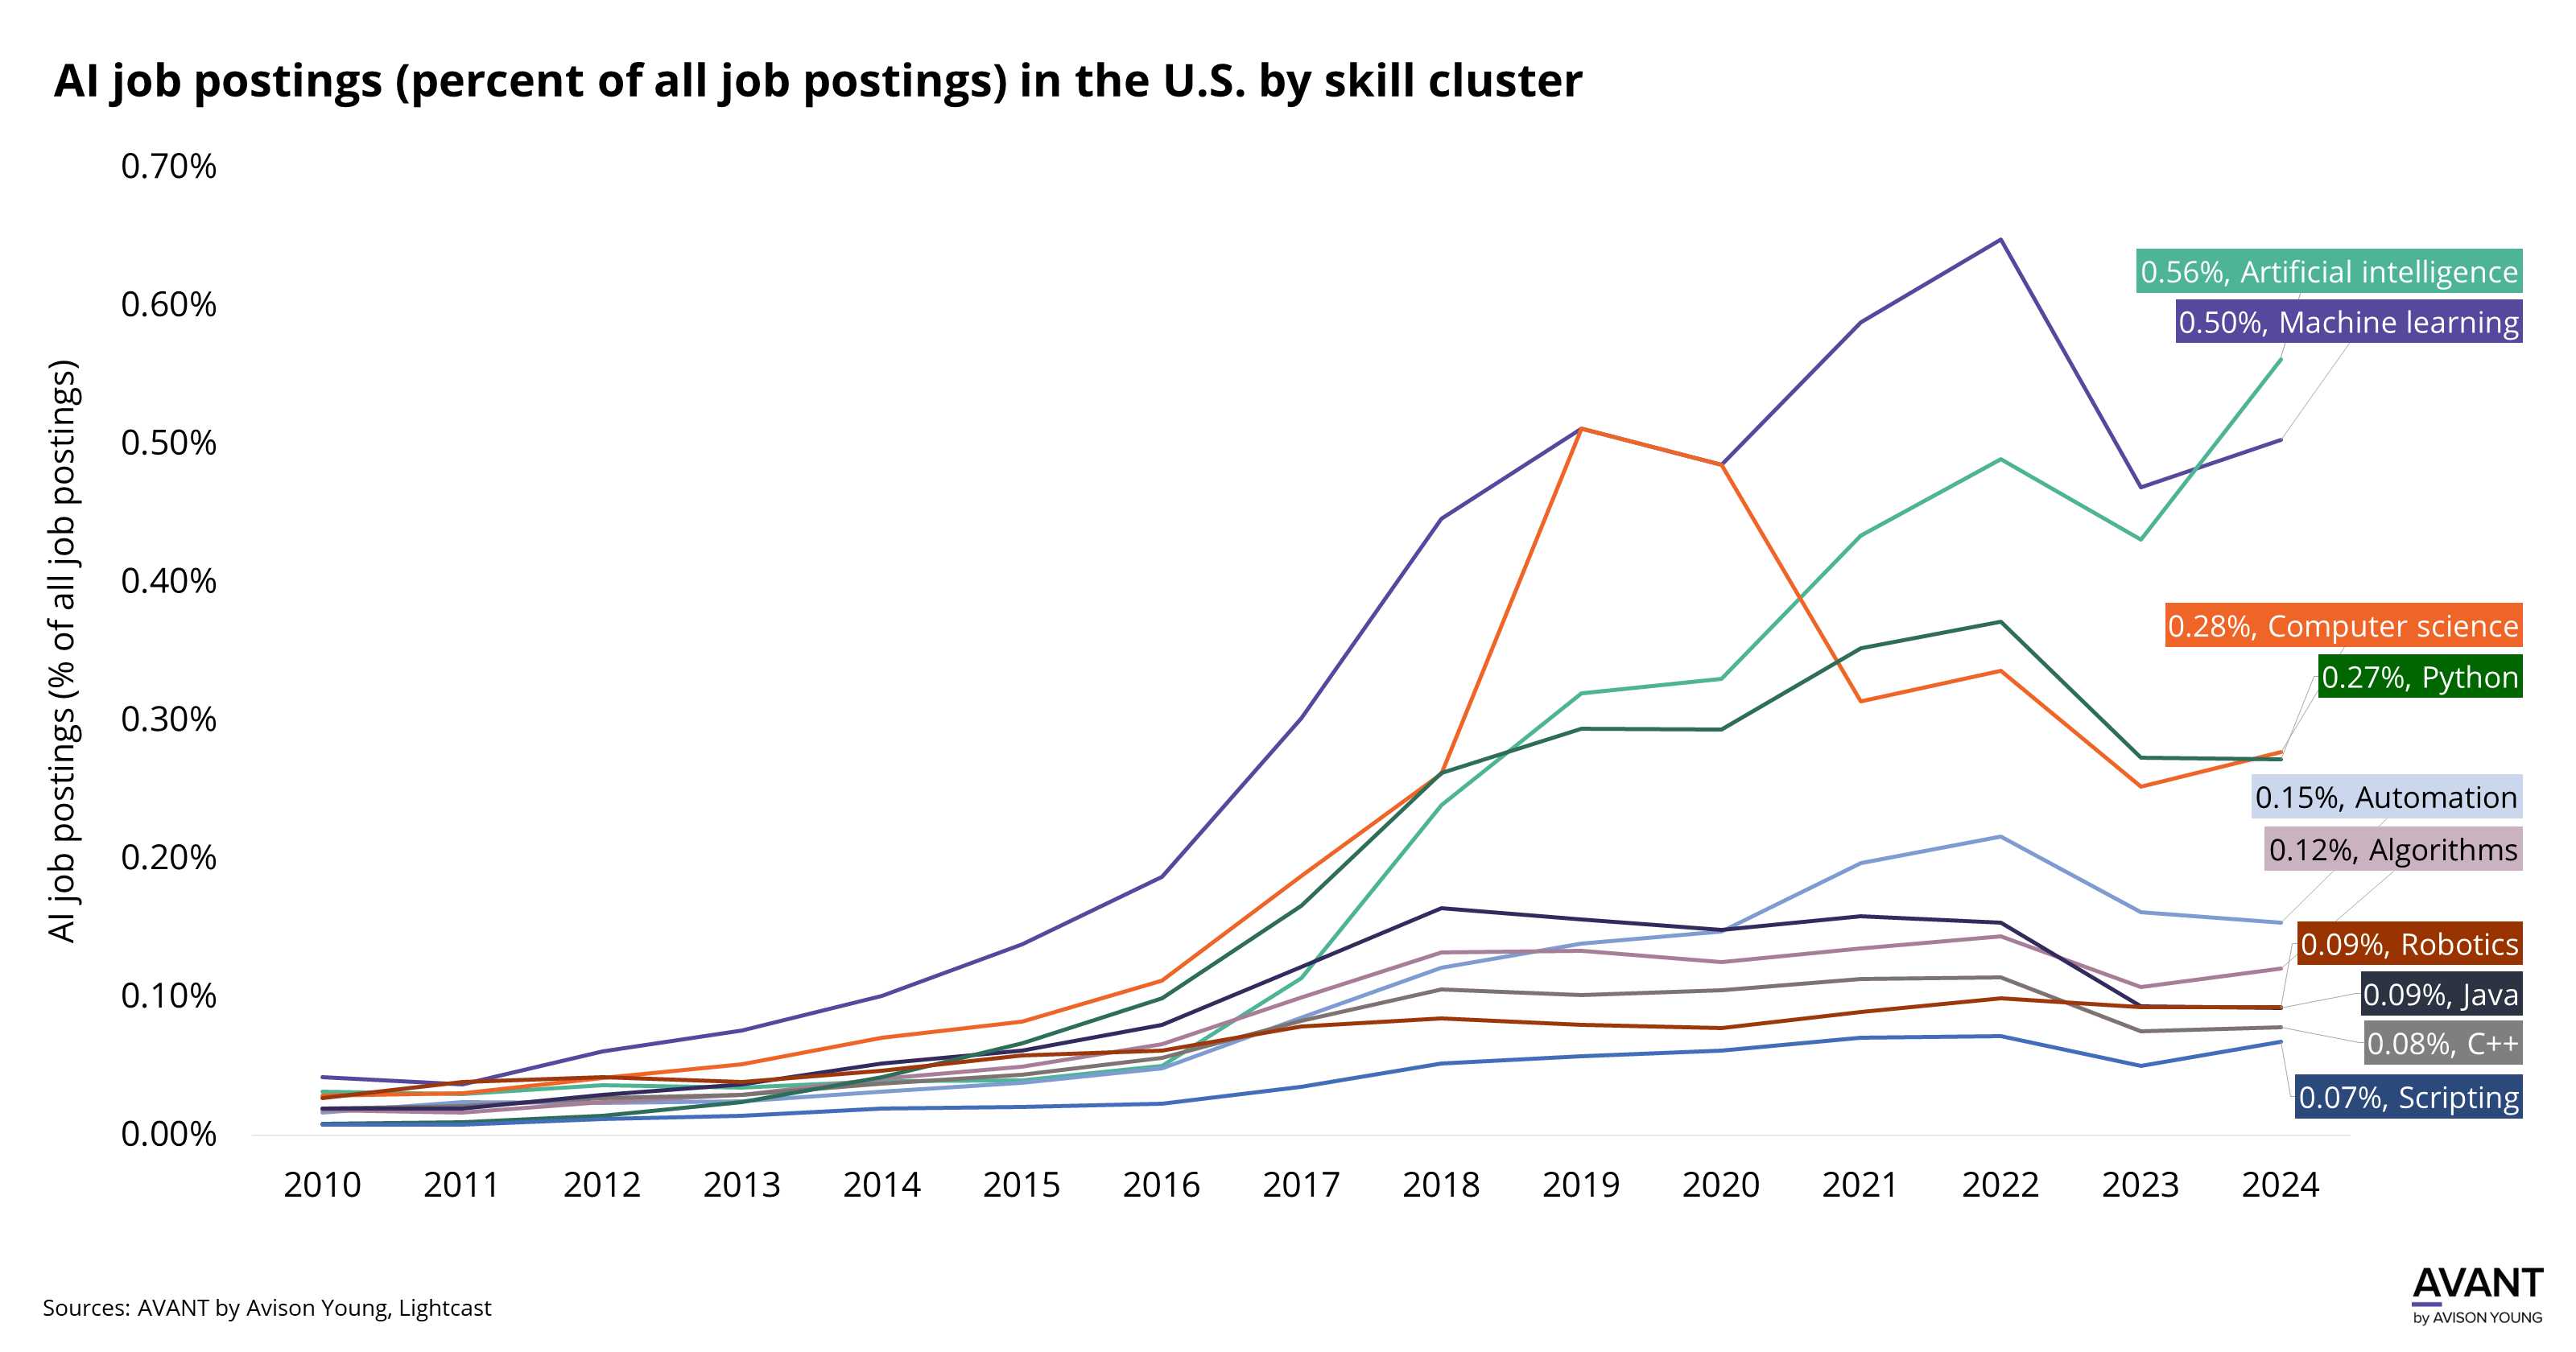 graph of AI job postings in the U.S. by skill cluster from 2010 to 2024